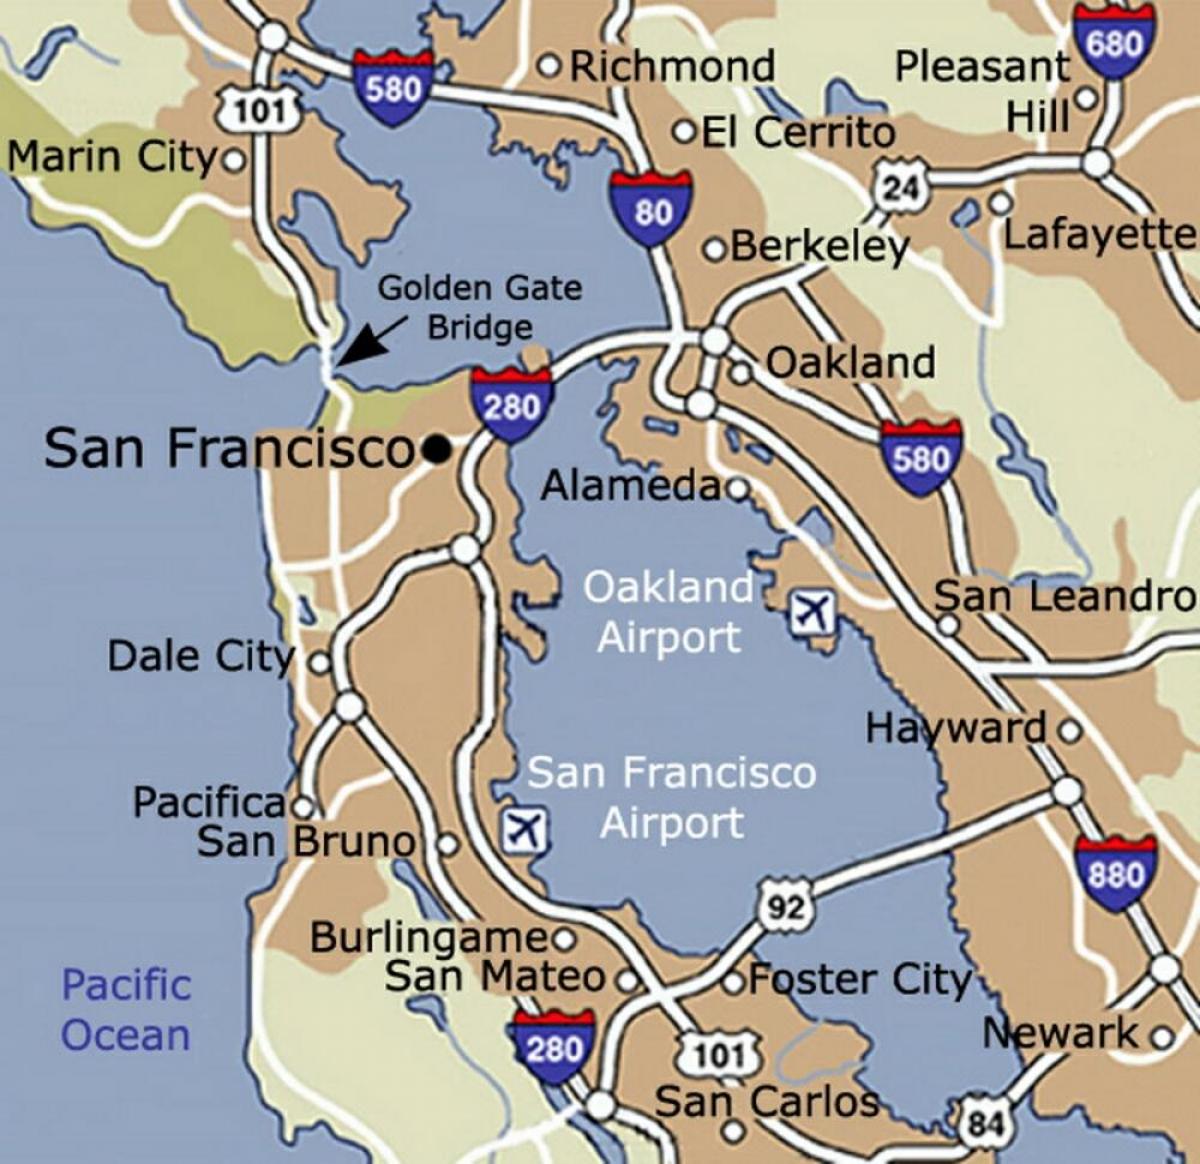 Map of San Francisco airport and surrounding area